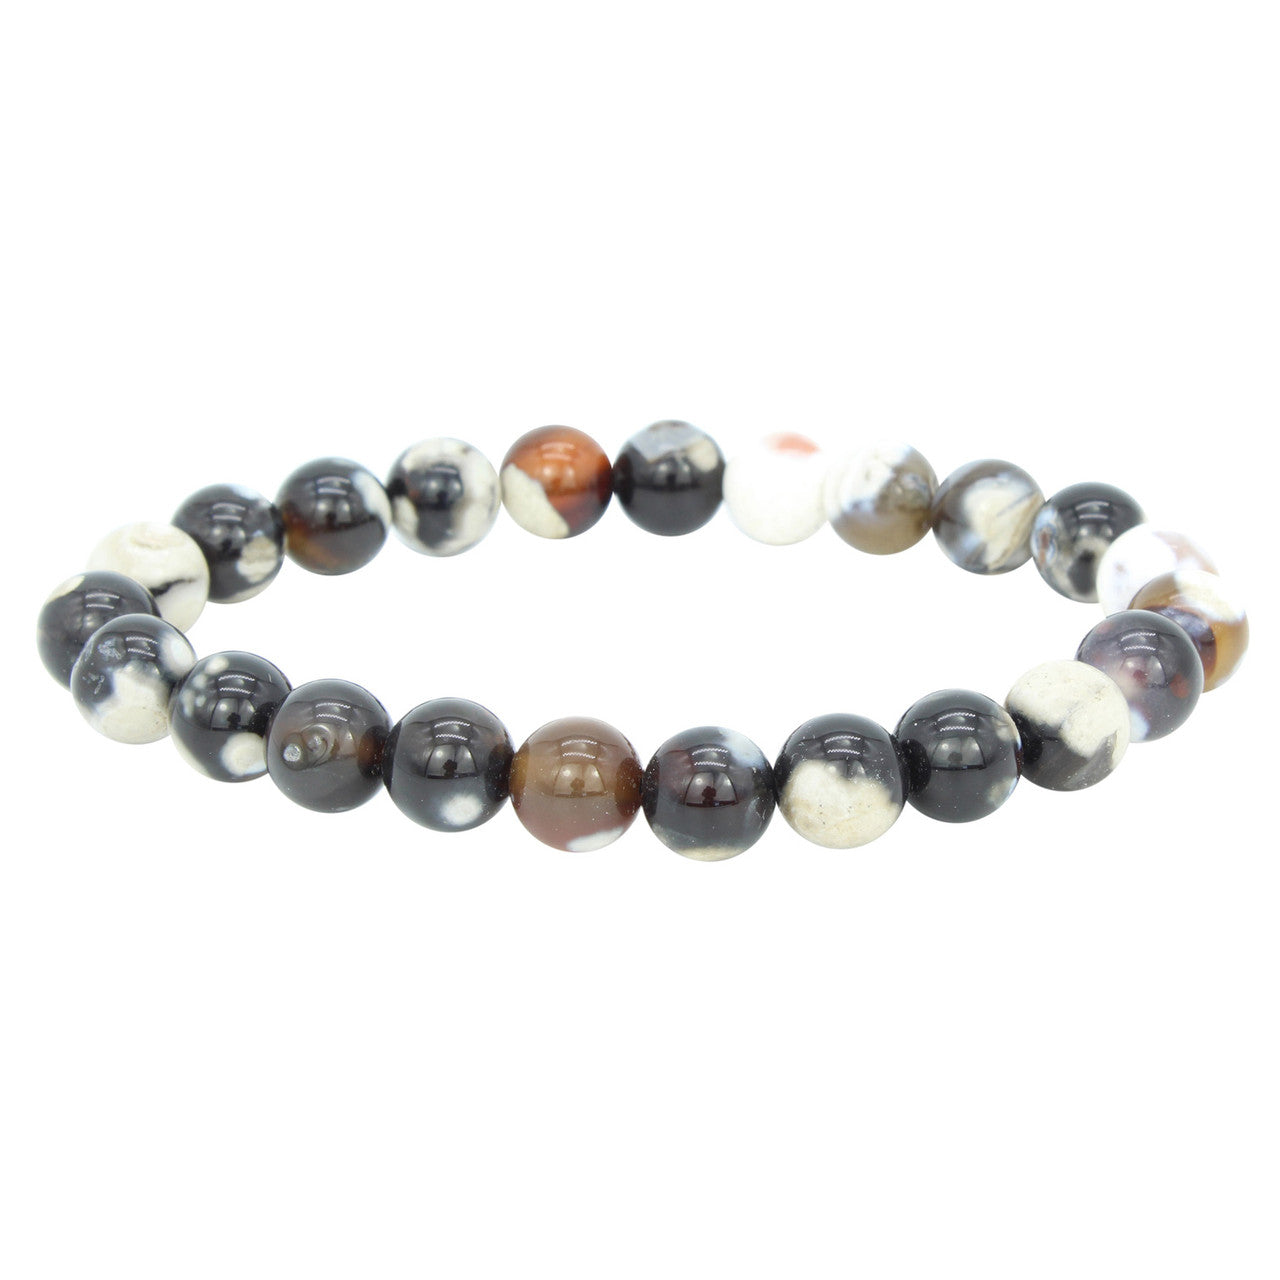 Orca Agate Stretch Bracelet 8mm Faceted